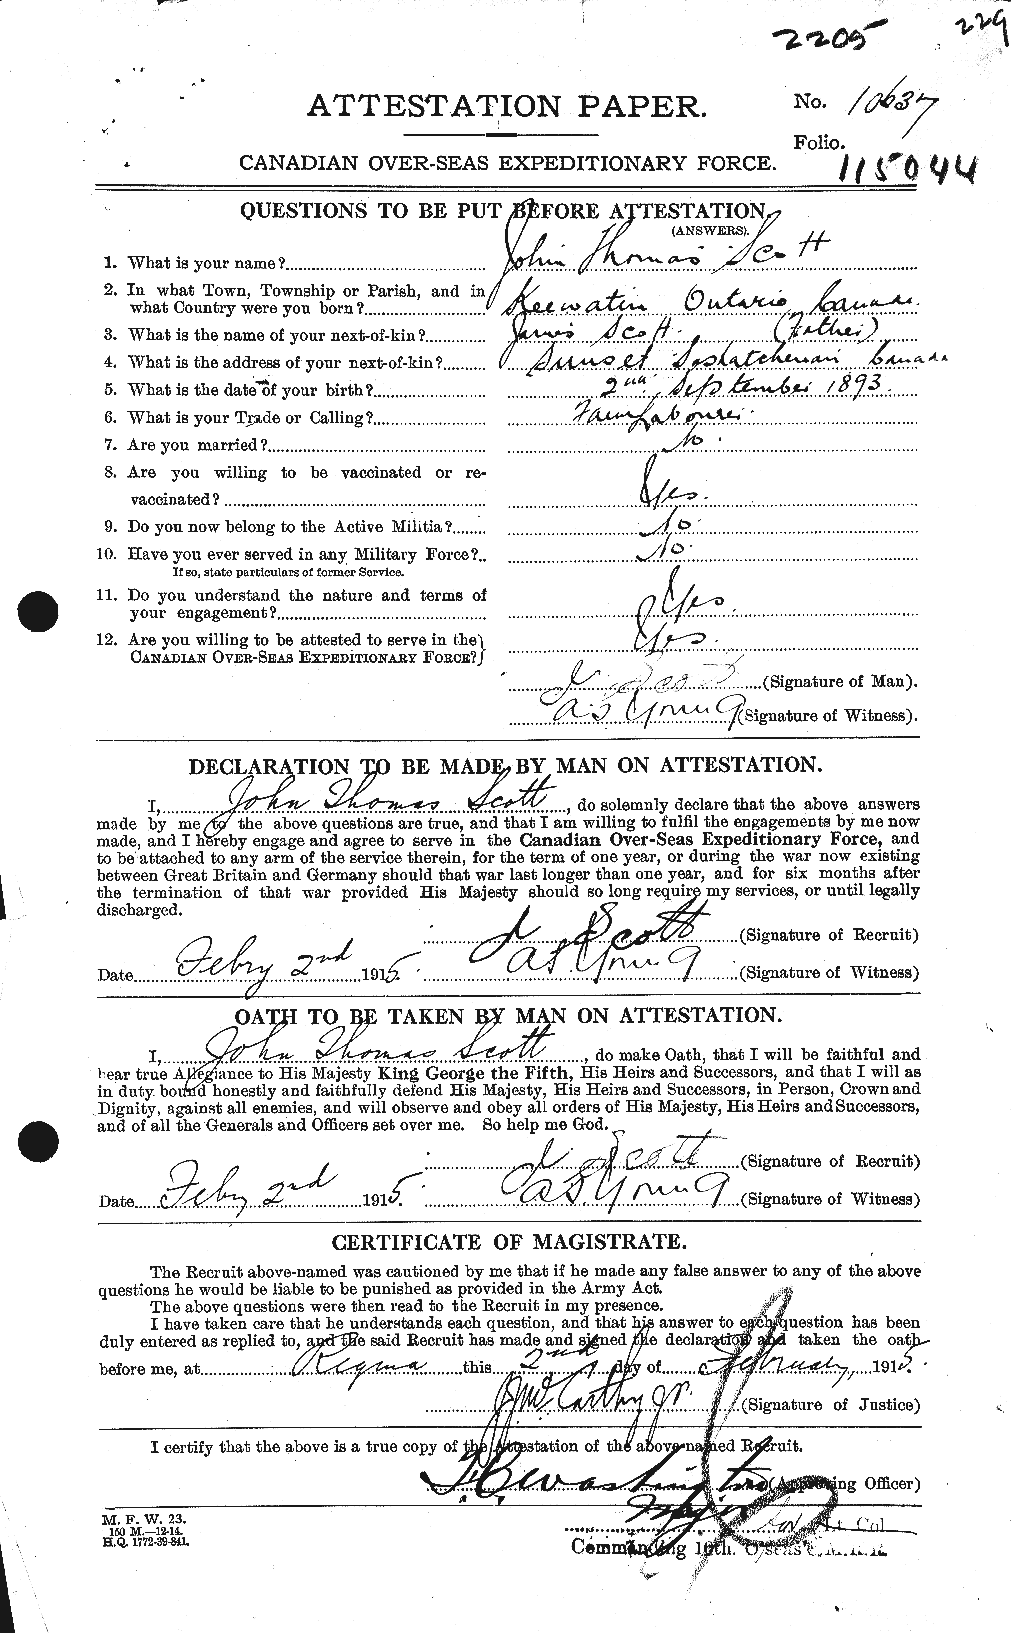 Personnel Records of the First World War - CEF 084418a